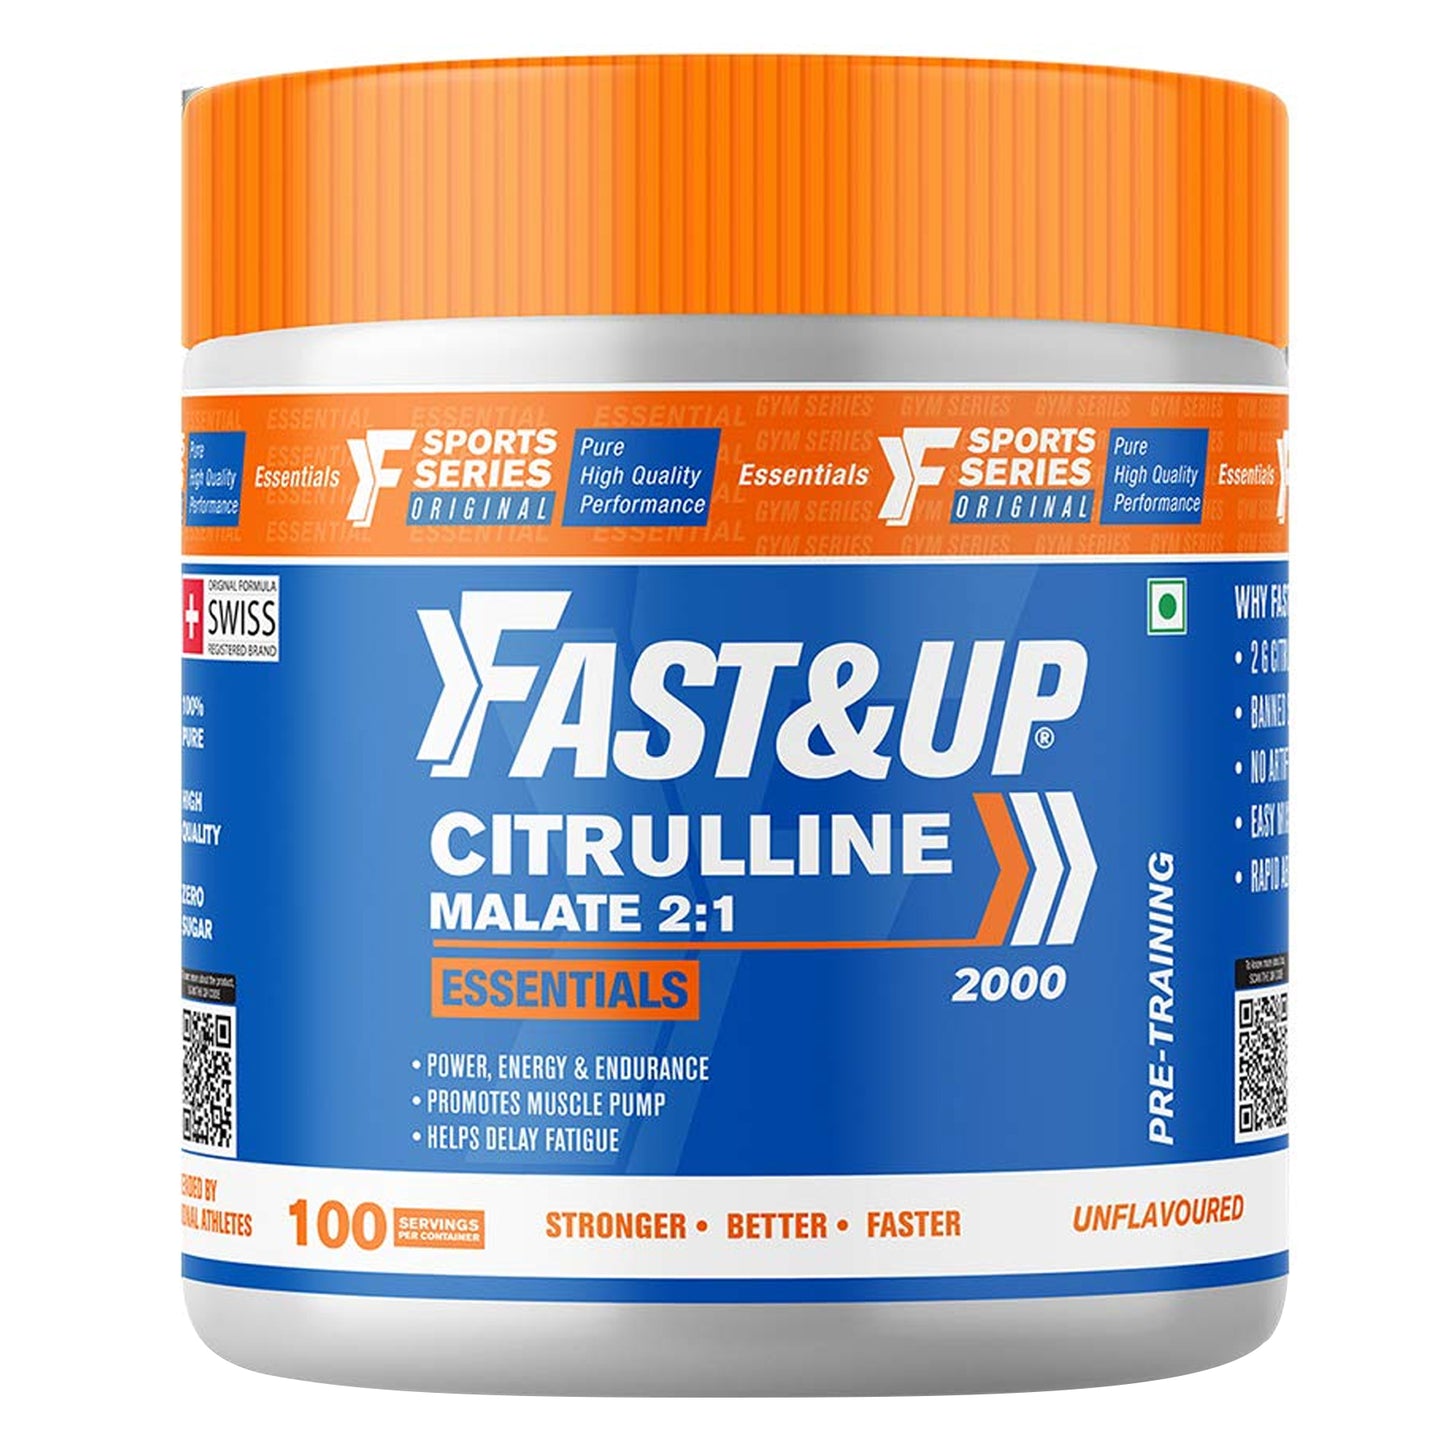 Fast&Up Citrulline Malate Essentials unflavoured, 100 Servings